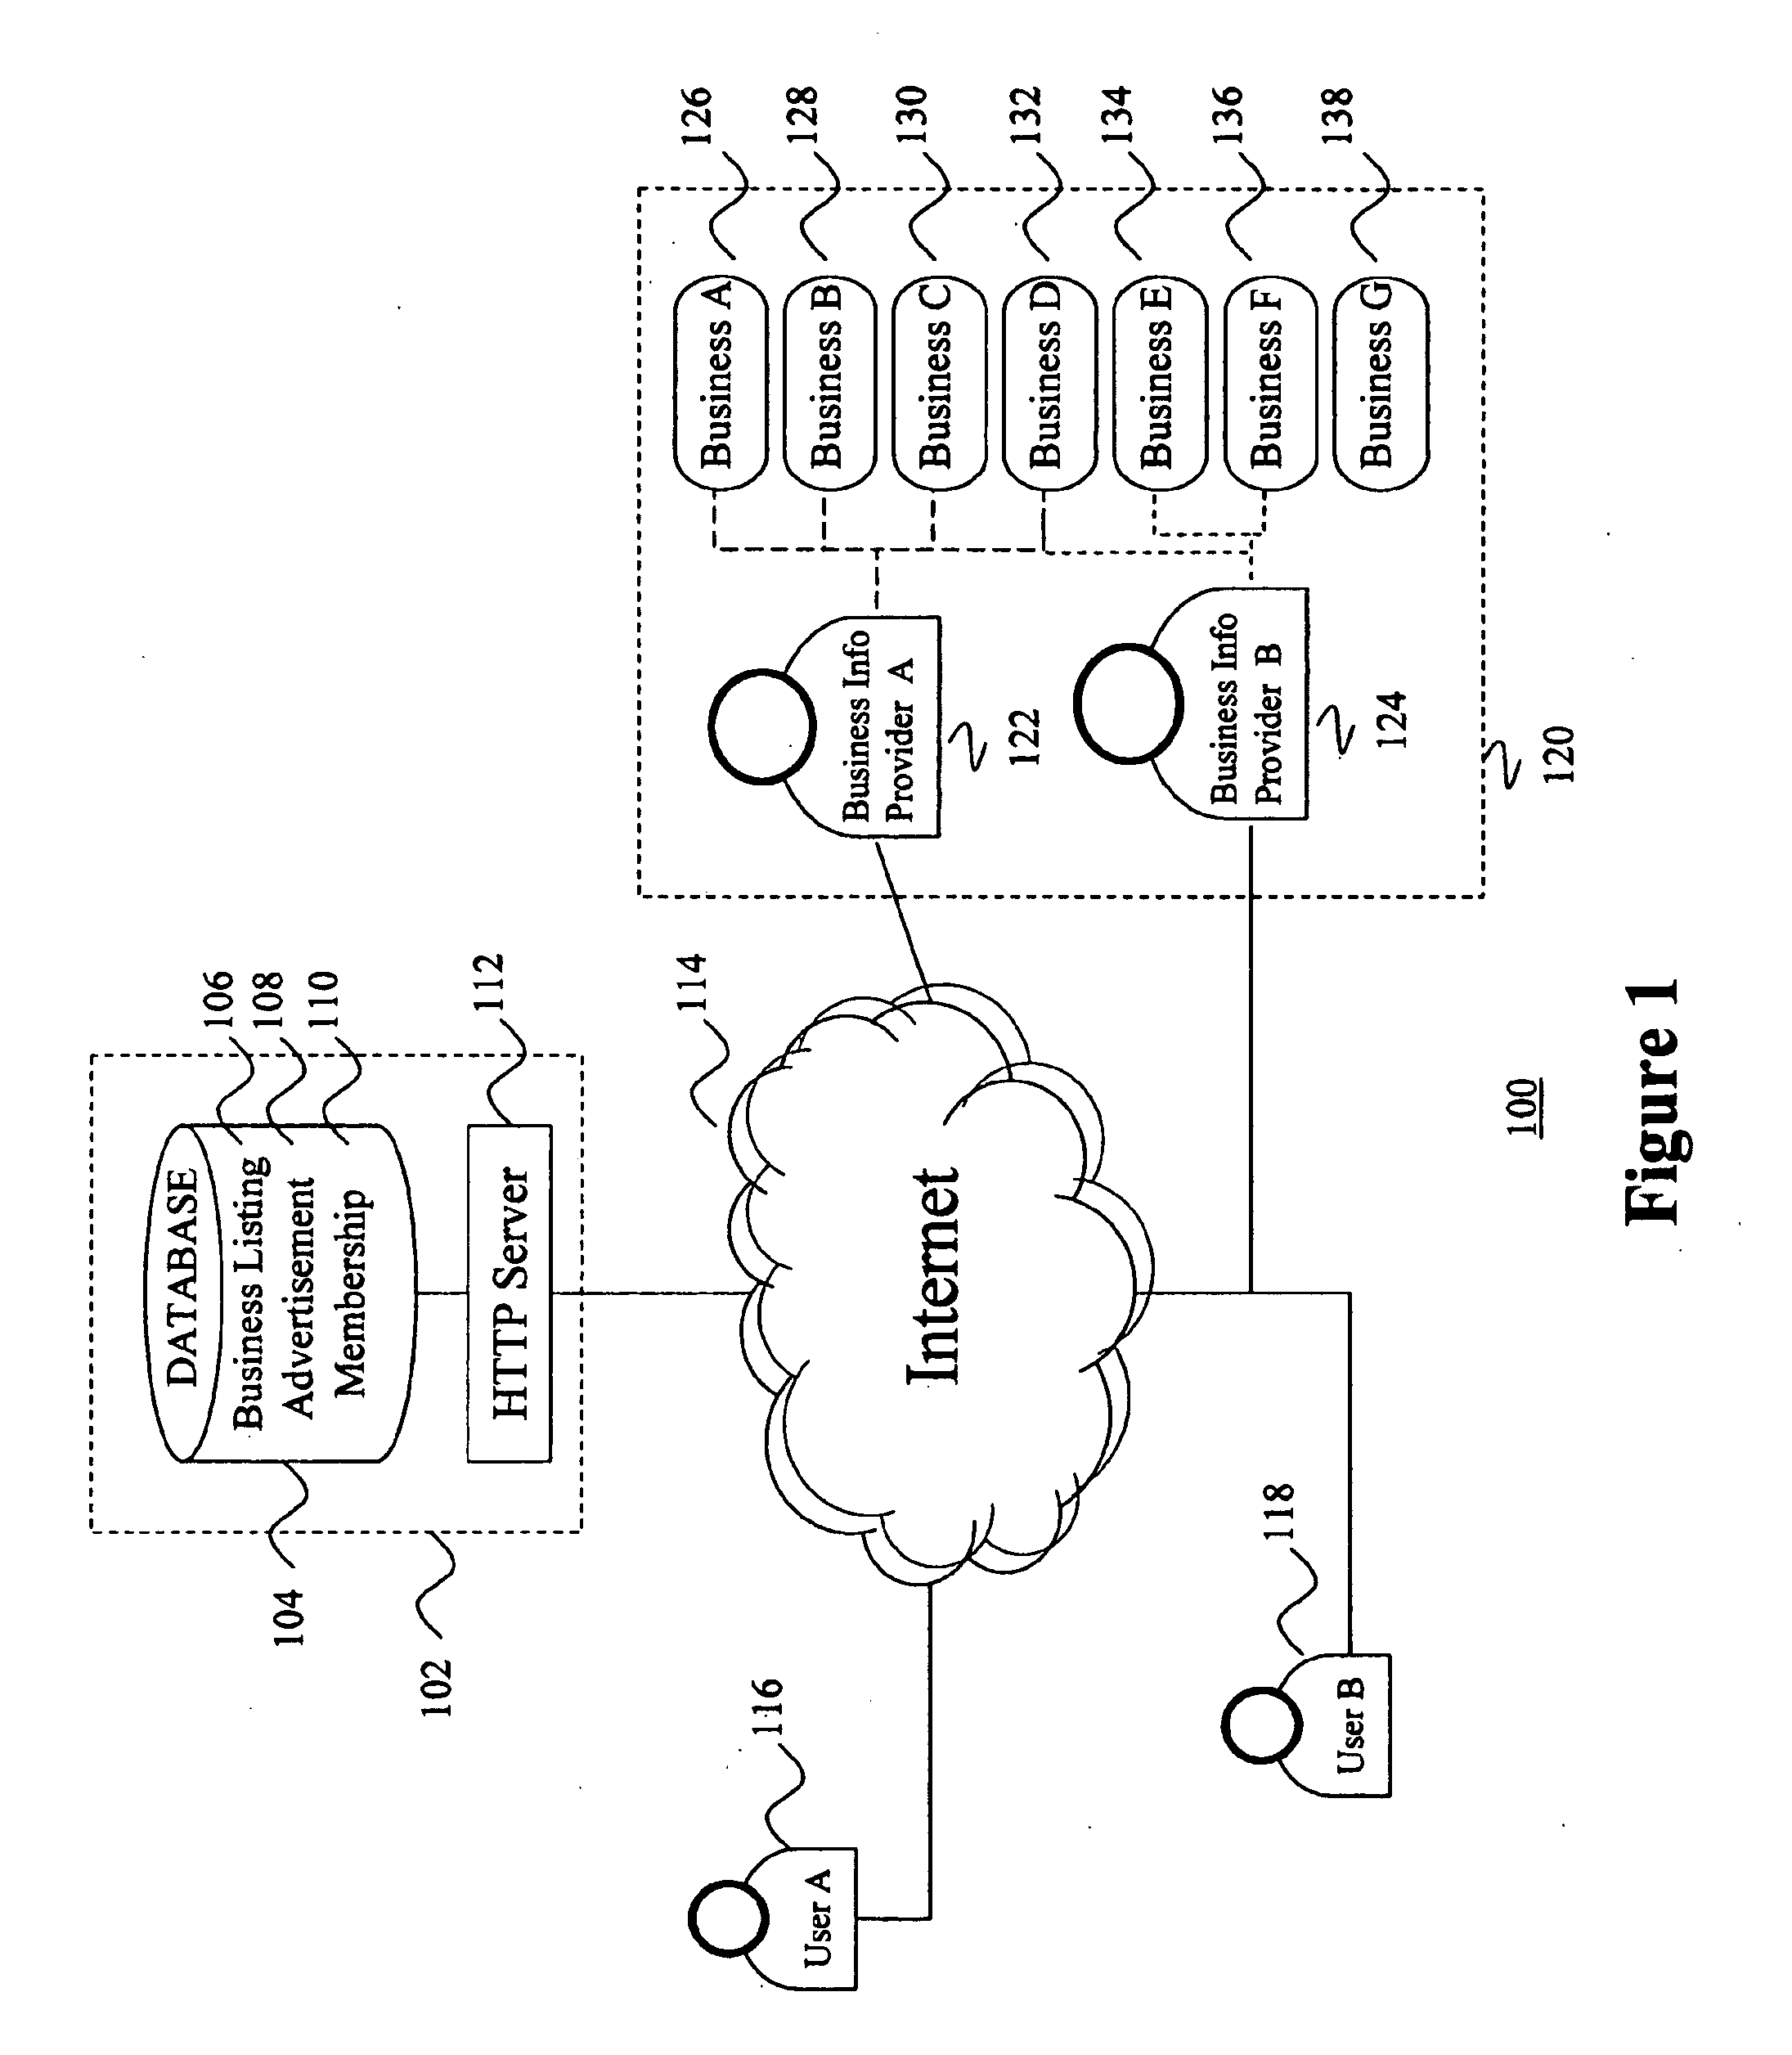 Method and apparatus for business info provider-based advertising in a local search market